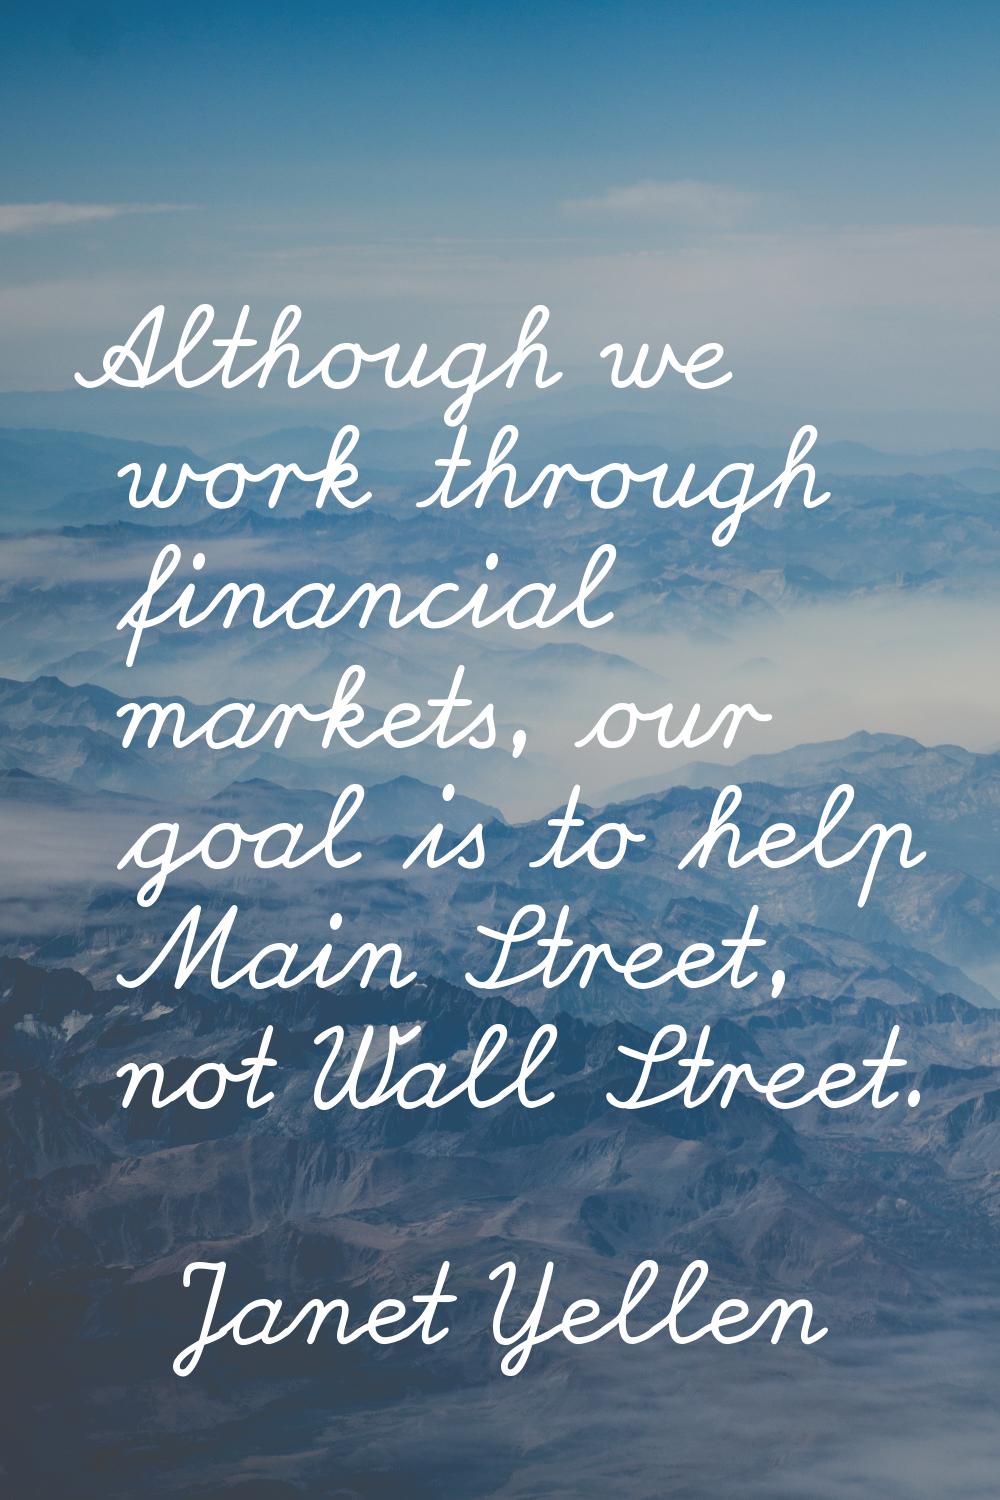 Although we work through financial markets, our goal is to help Main Street, not Wall Street.